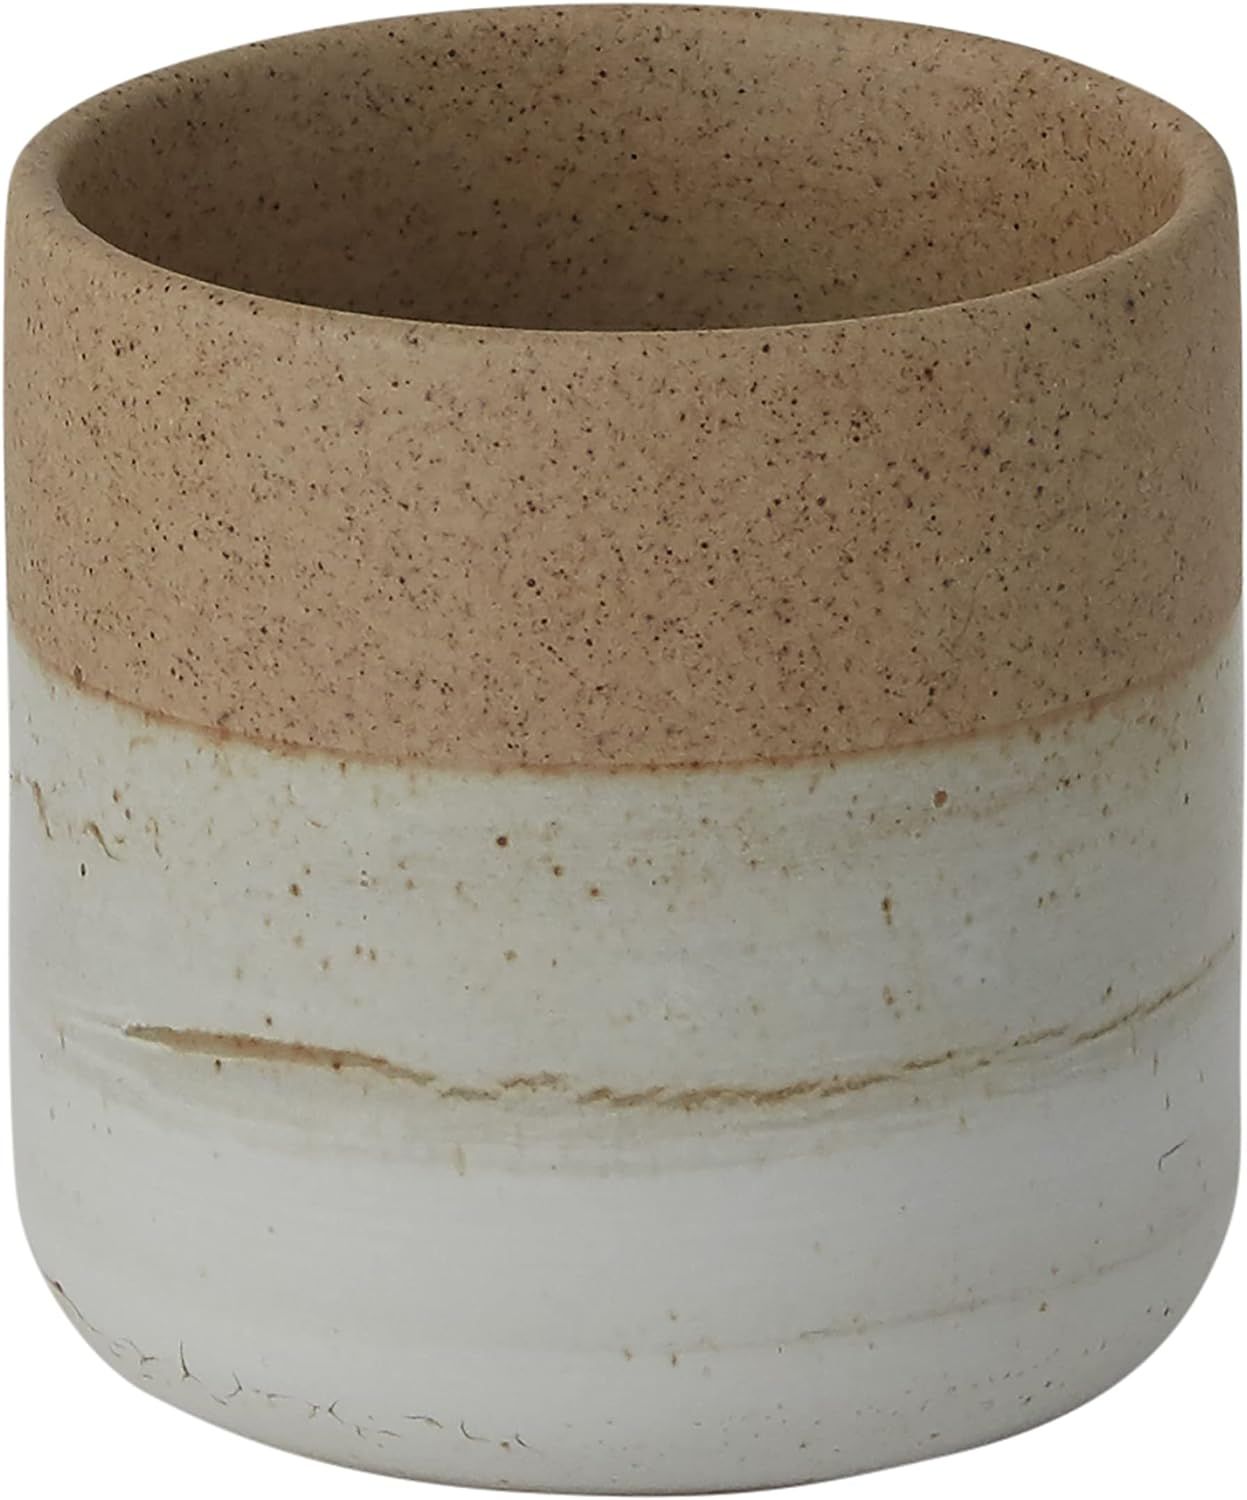 Two-Tone Marbled Speckled Planter Pot | Amazon (US)